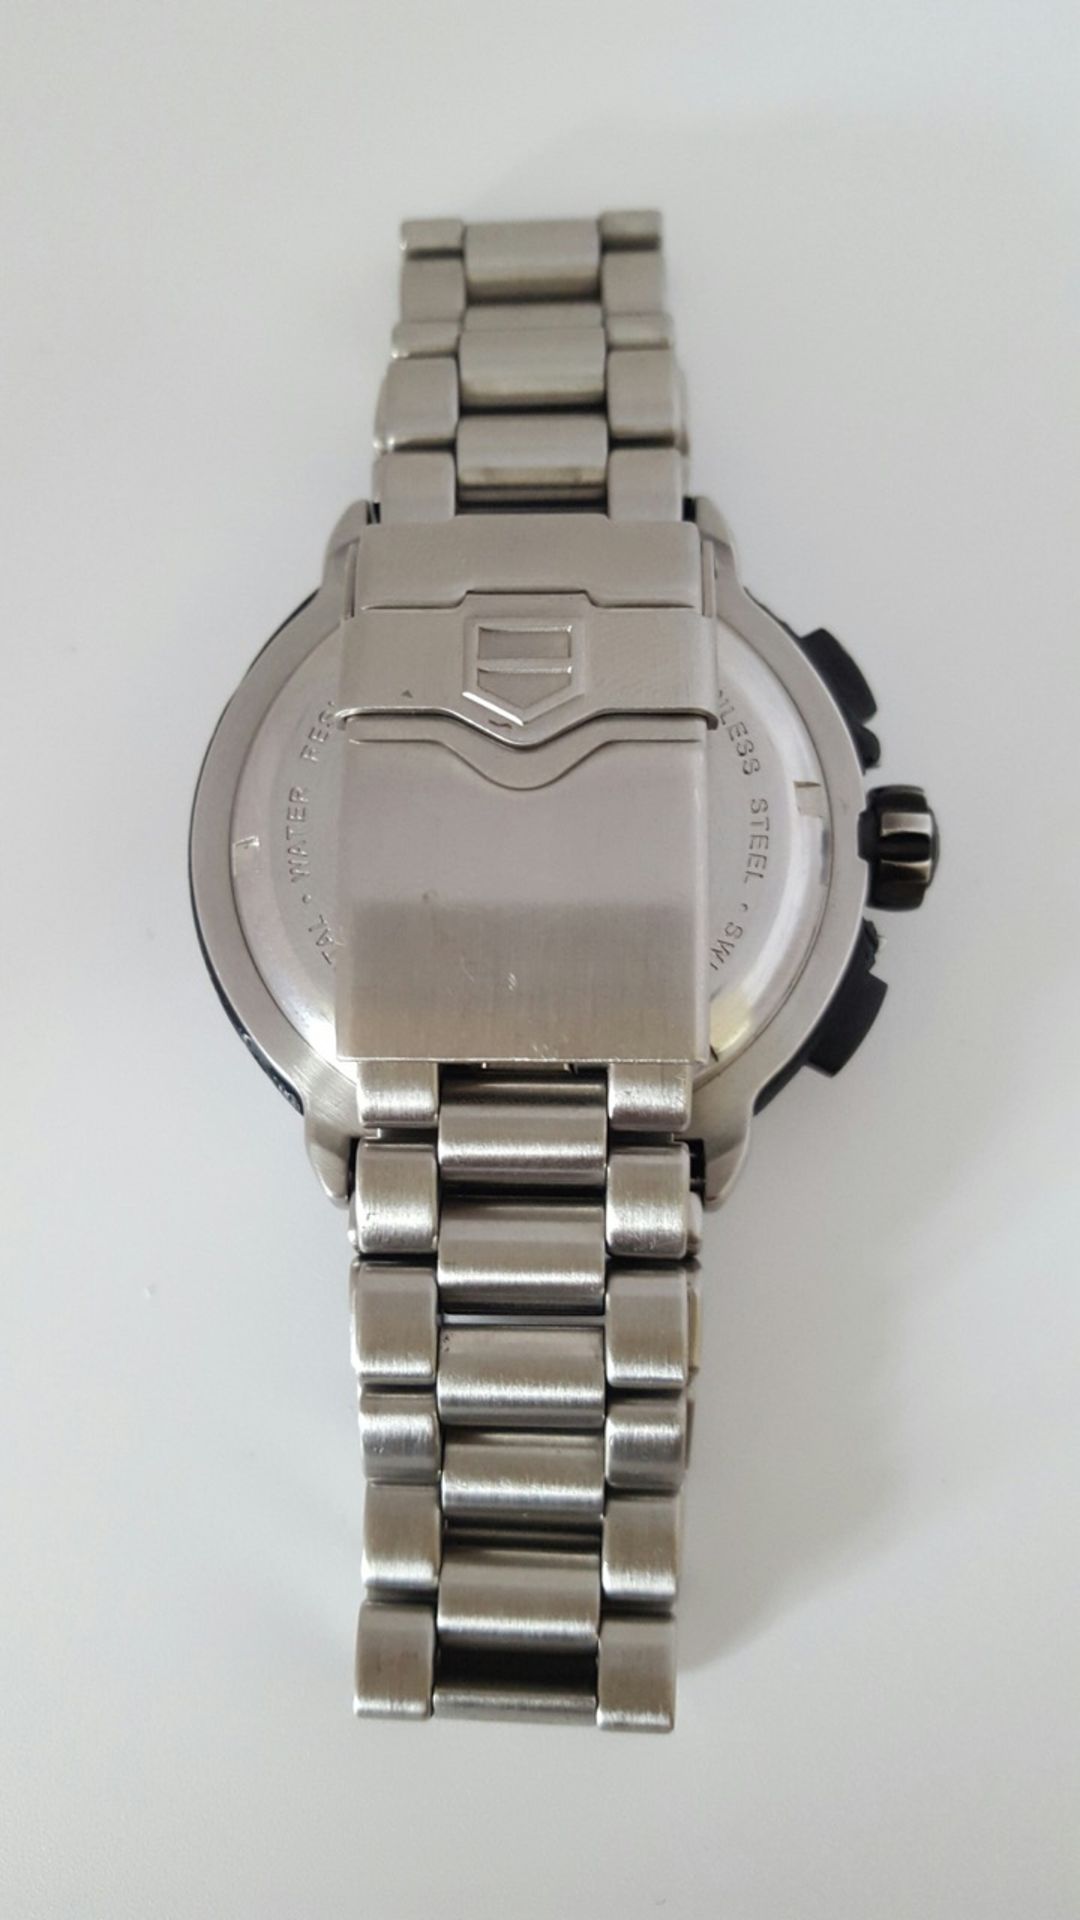 TAG HEUER F1 CAC1111-1 CHRONOGRAPH WATCH - Image 4 of 4